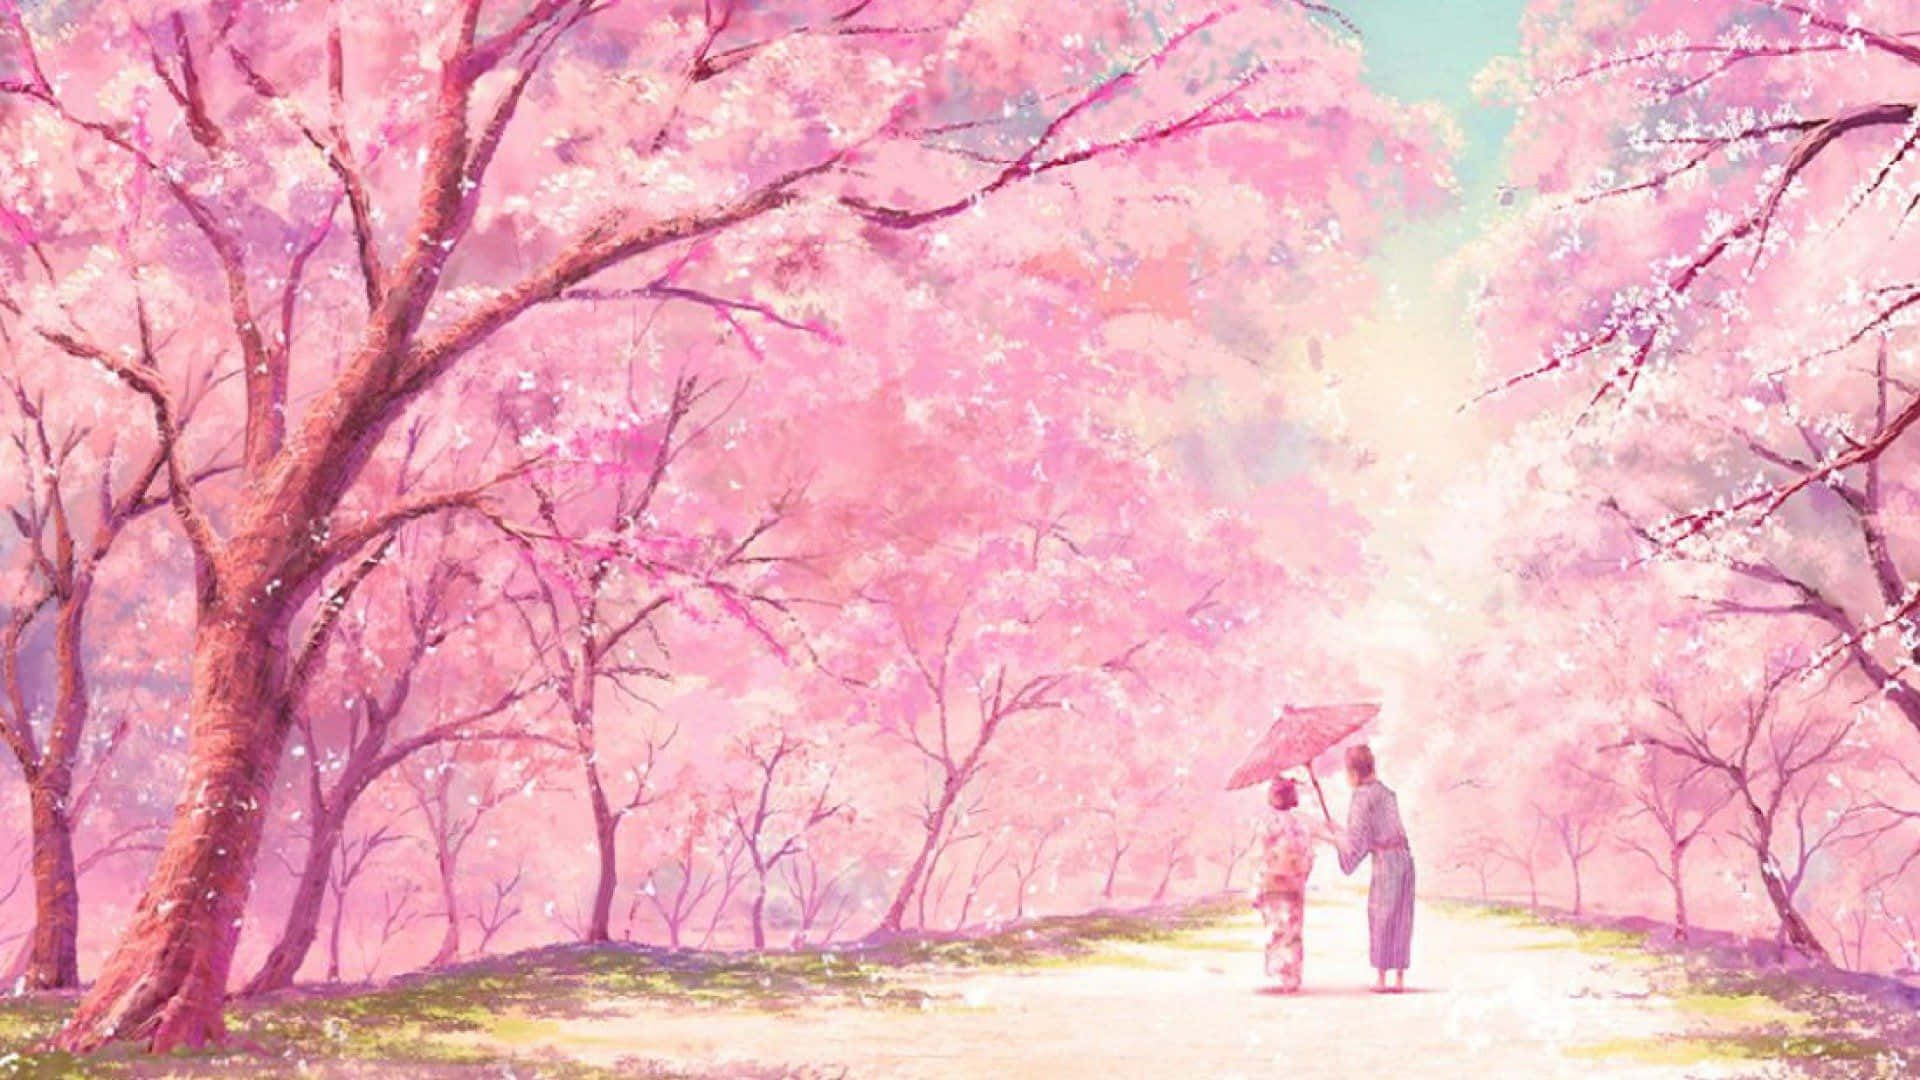 Pastel Anime HD Wallpapers Desktop Background  Android  iPhone  1080p 4k  34858